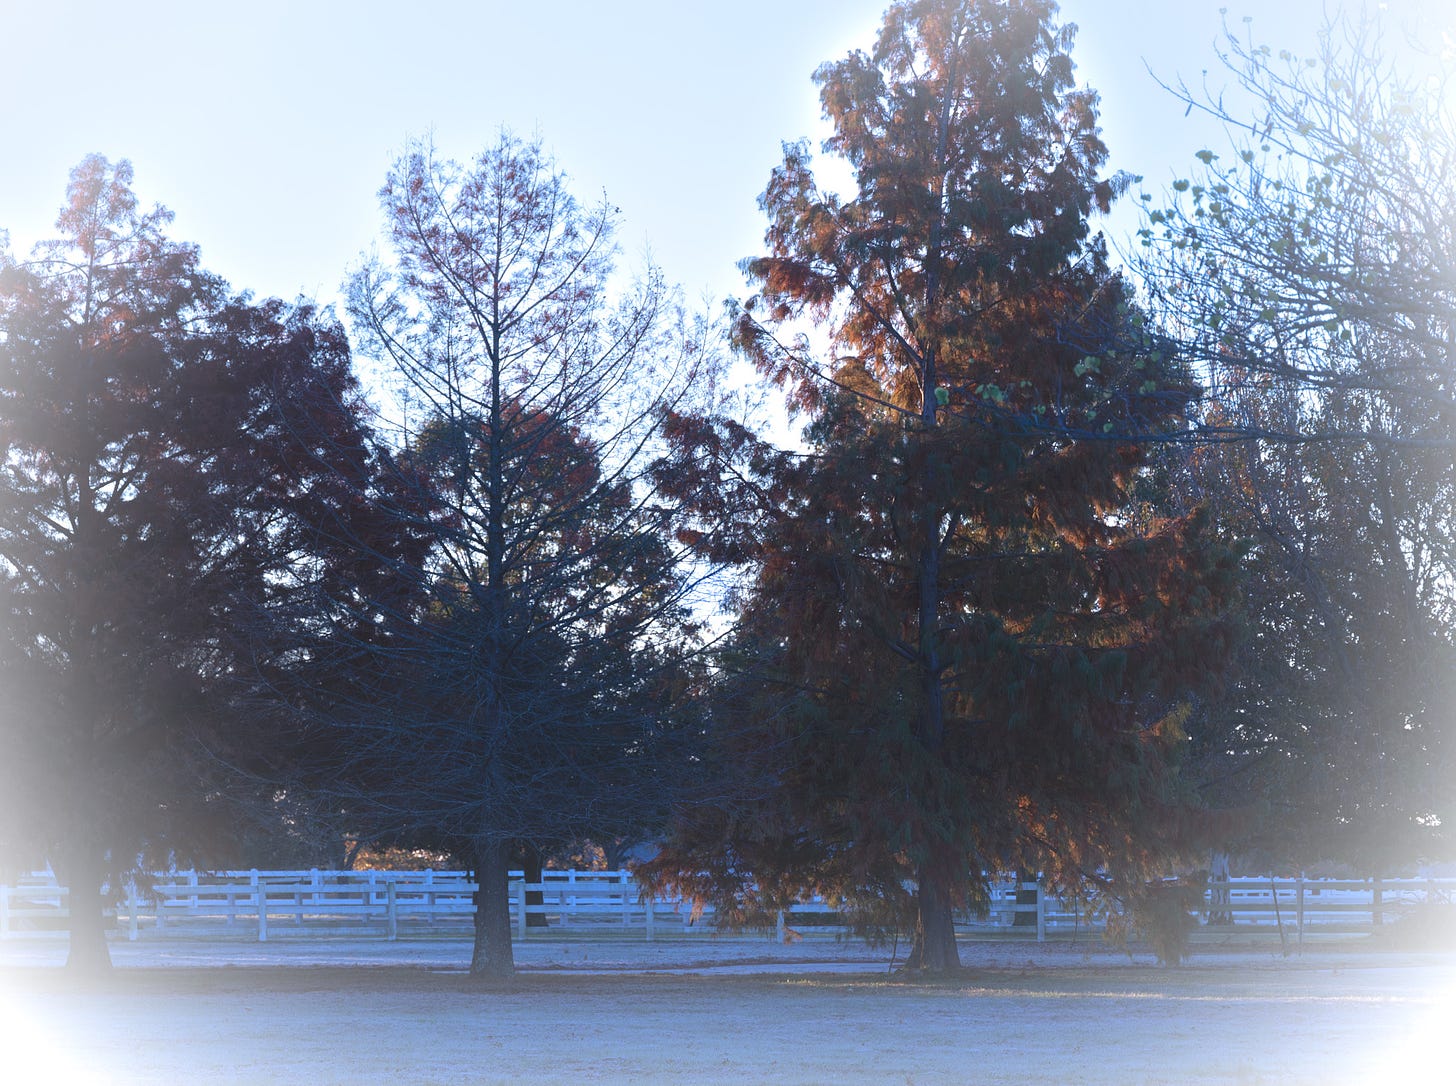 landscape at sunrise with frost on the ground, the sun reflecting off the reddish cypress tree in the center with other trees on either side and a white rail fence in the background